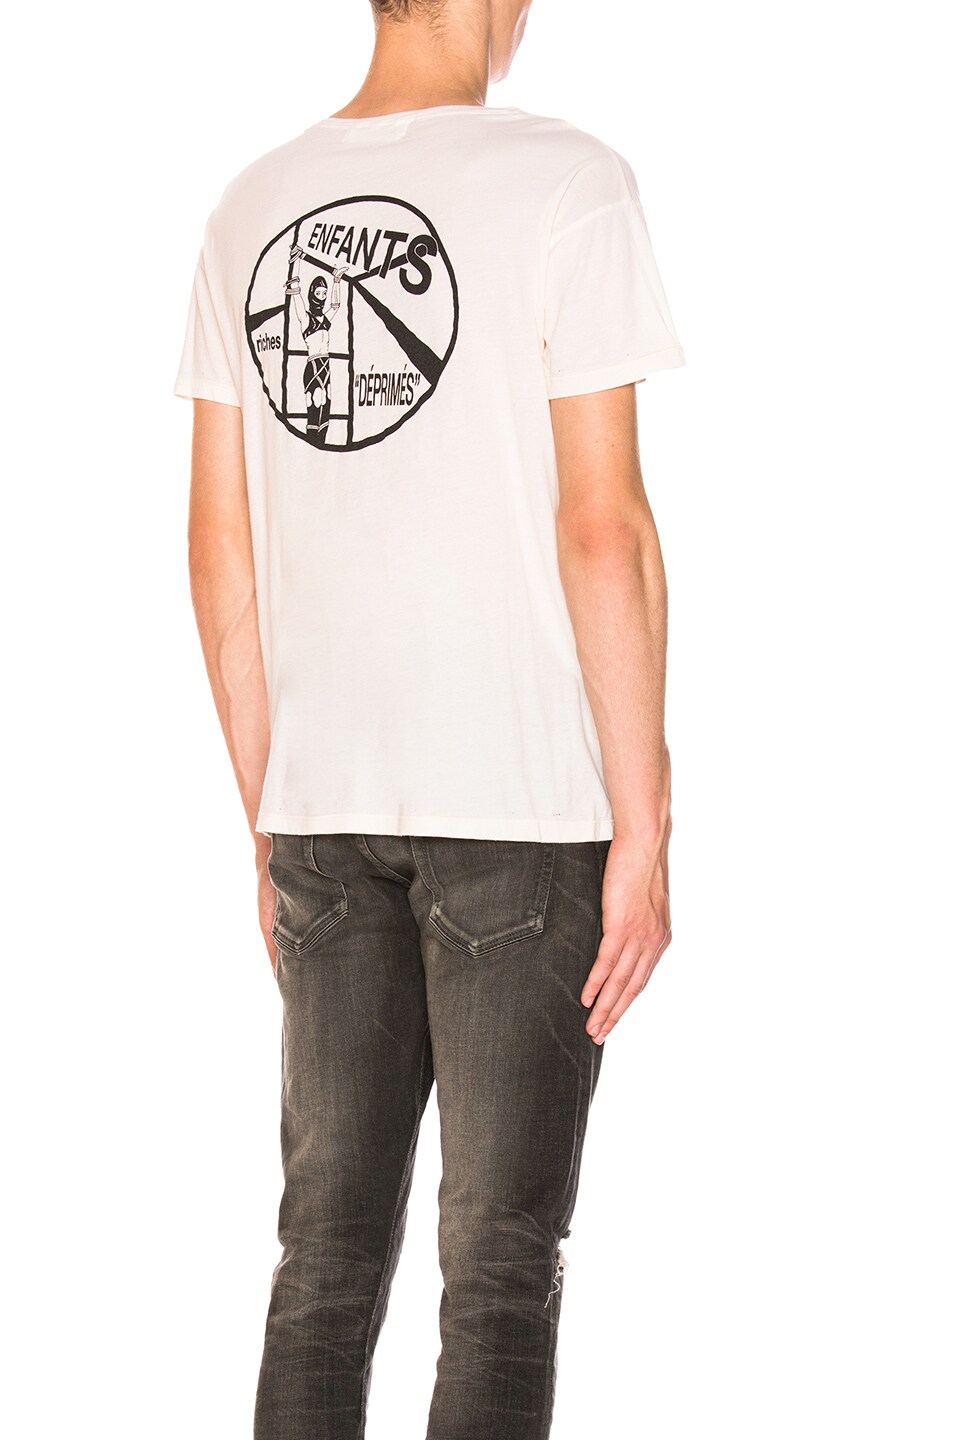 Image 1 of Enfants Riches Deprimes PTV Tee in White